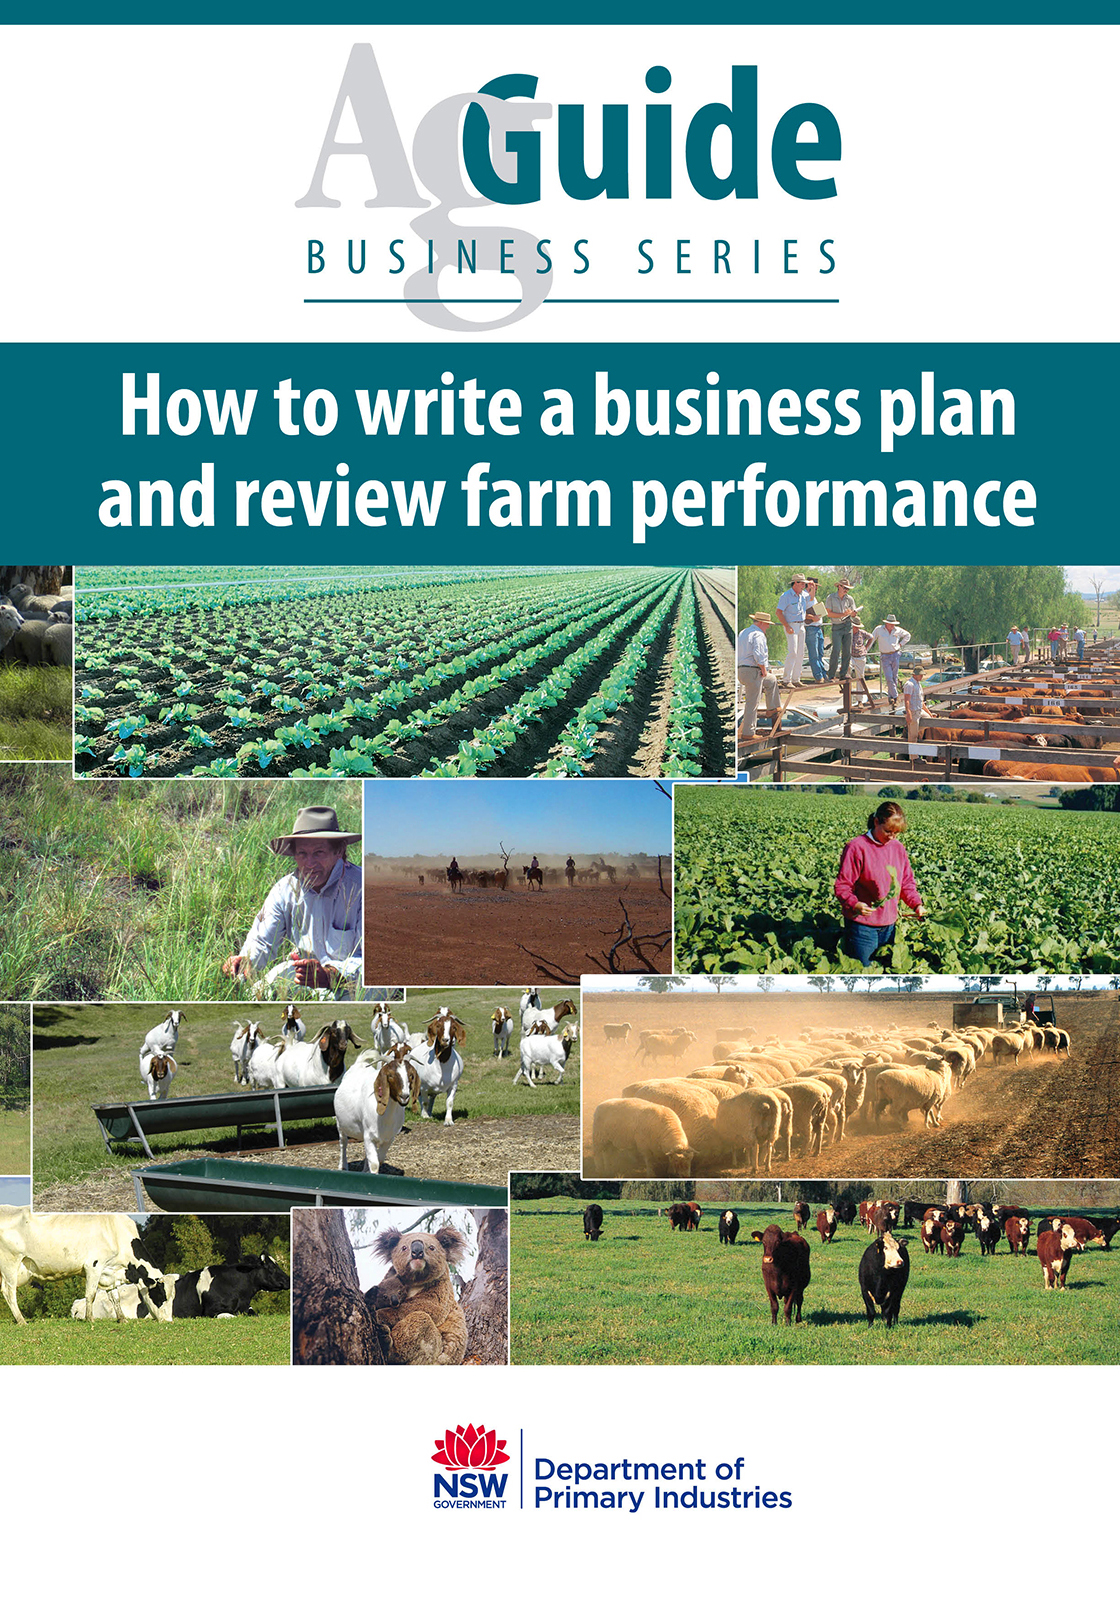 agriculture business plan pdf